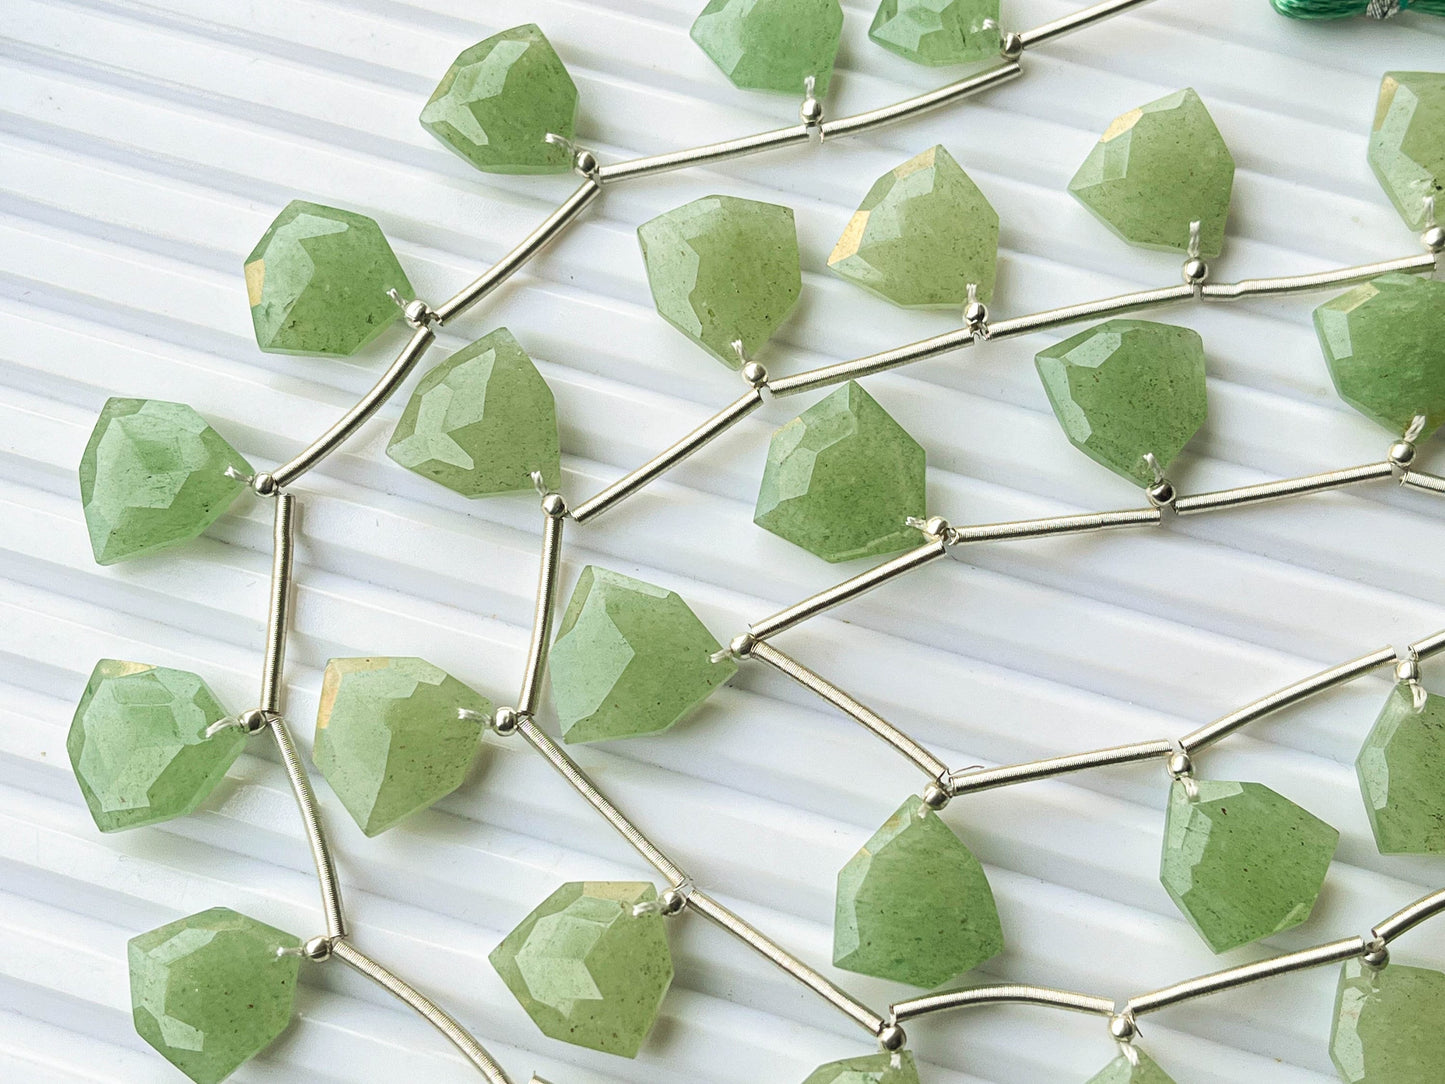 Green Jade Trillion shape faceted briolette beads, 11mm to 15mm